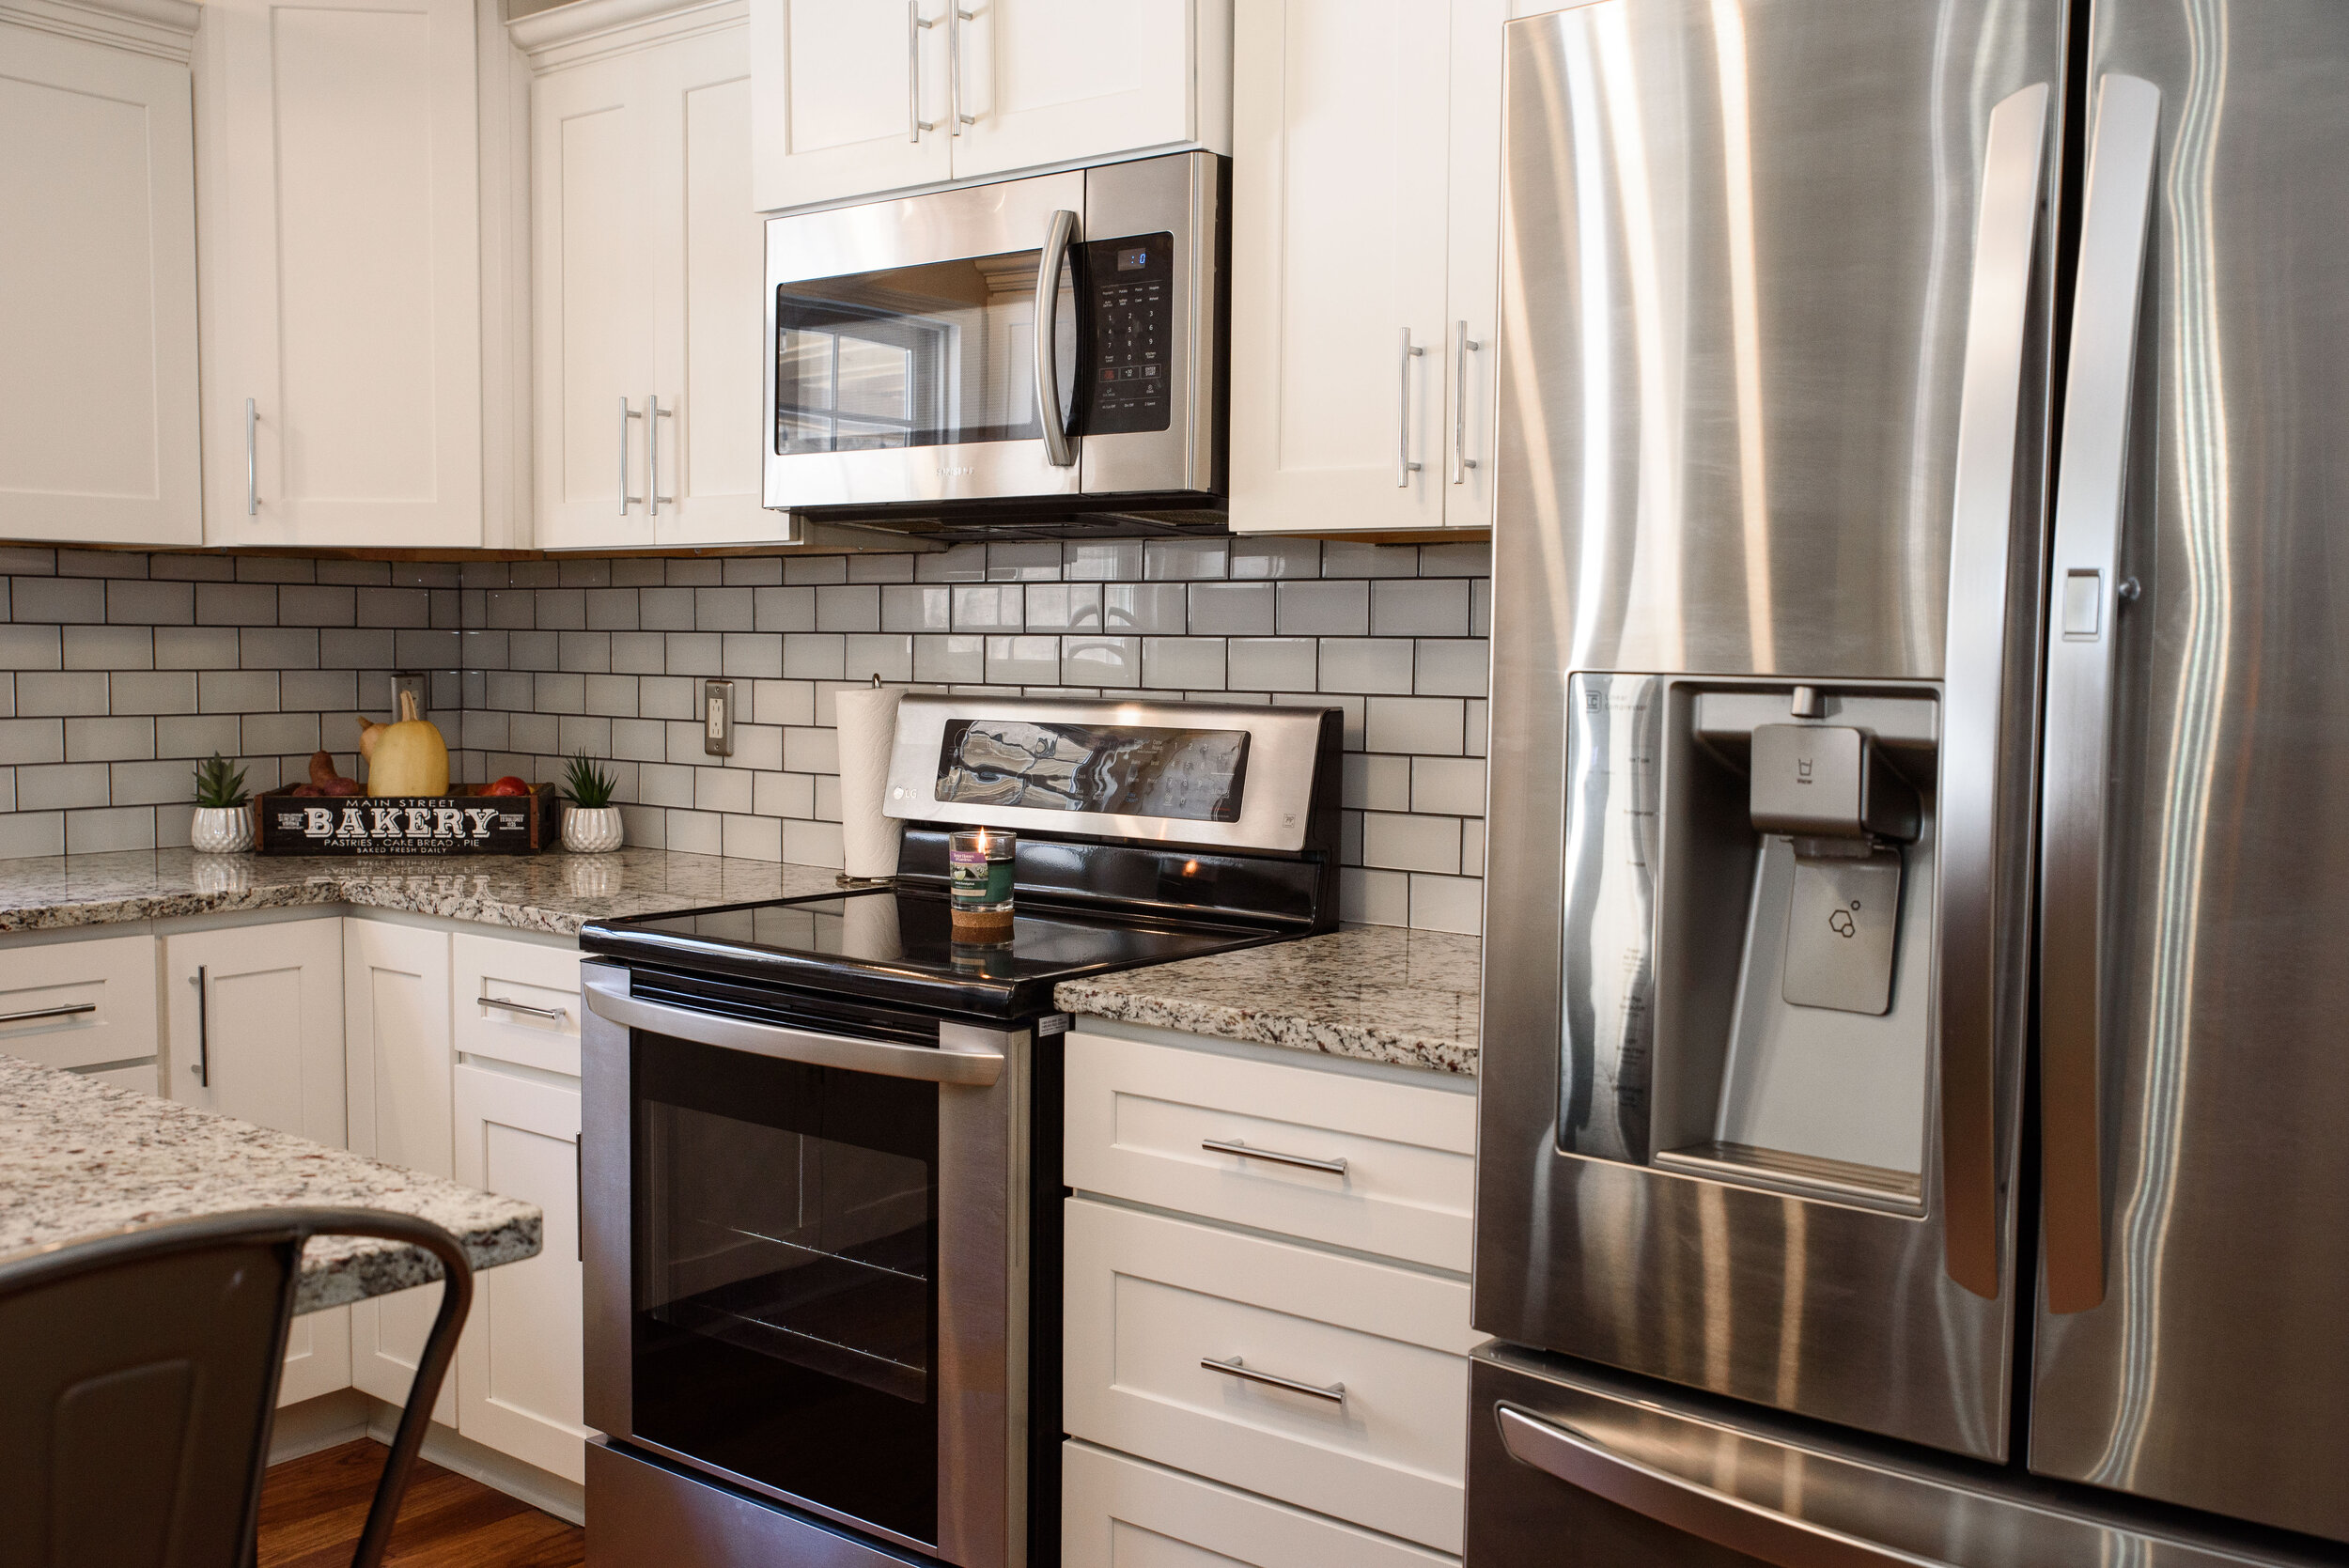 Real Estate Kitchen Photography with Stainless Appliances